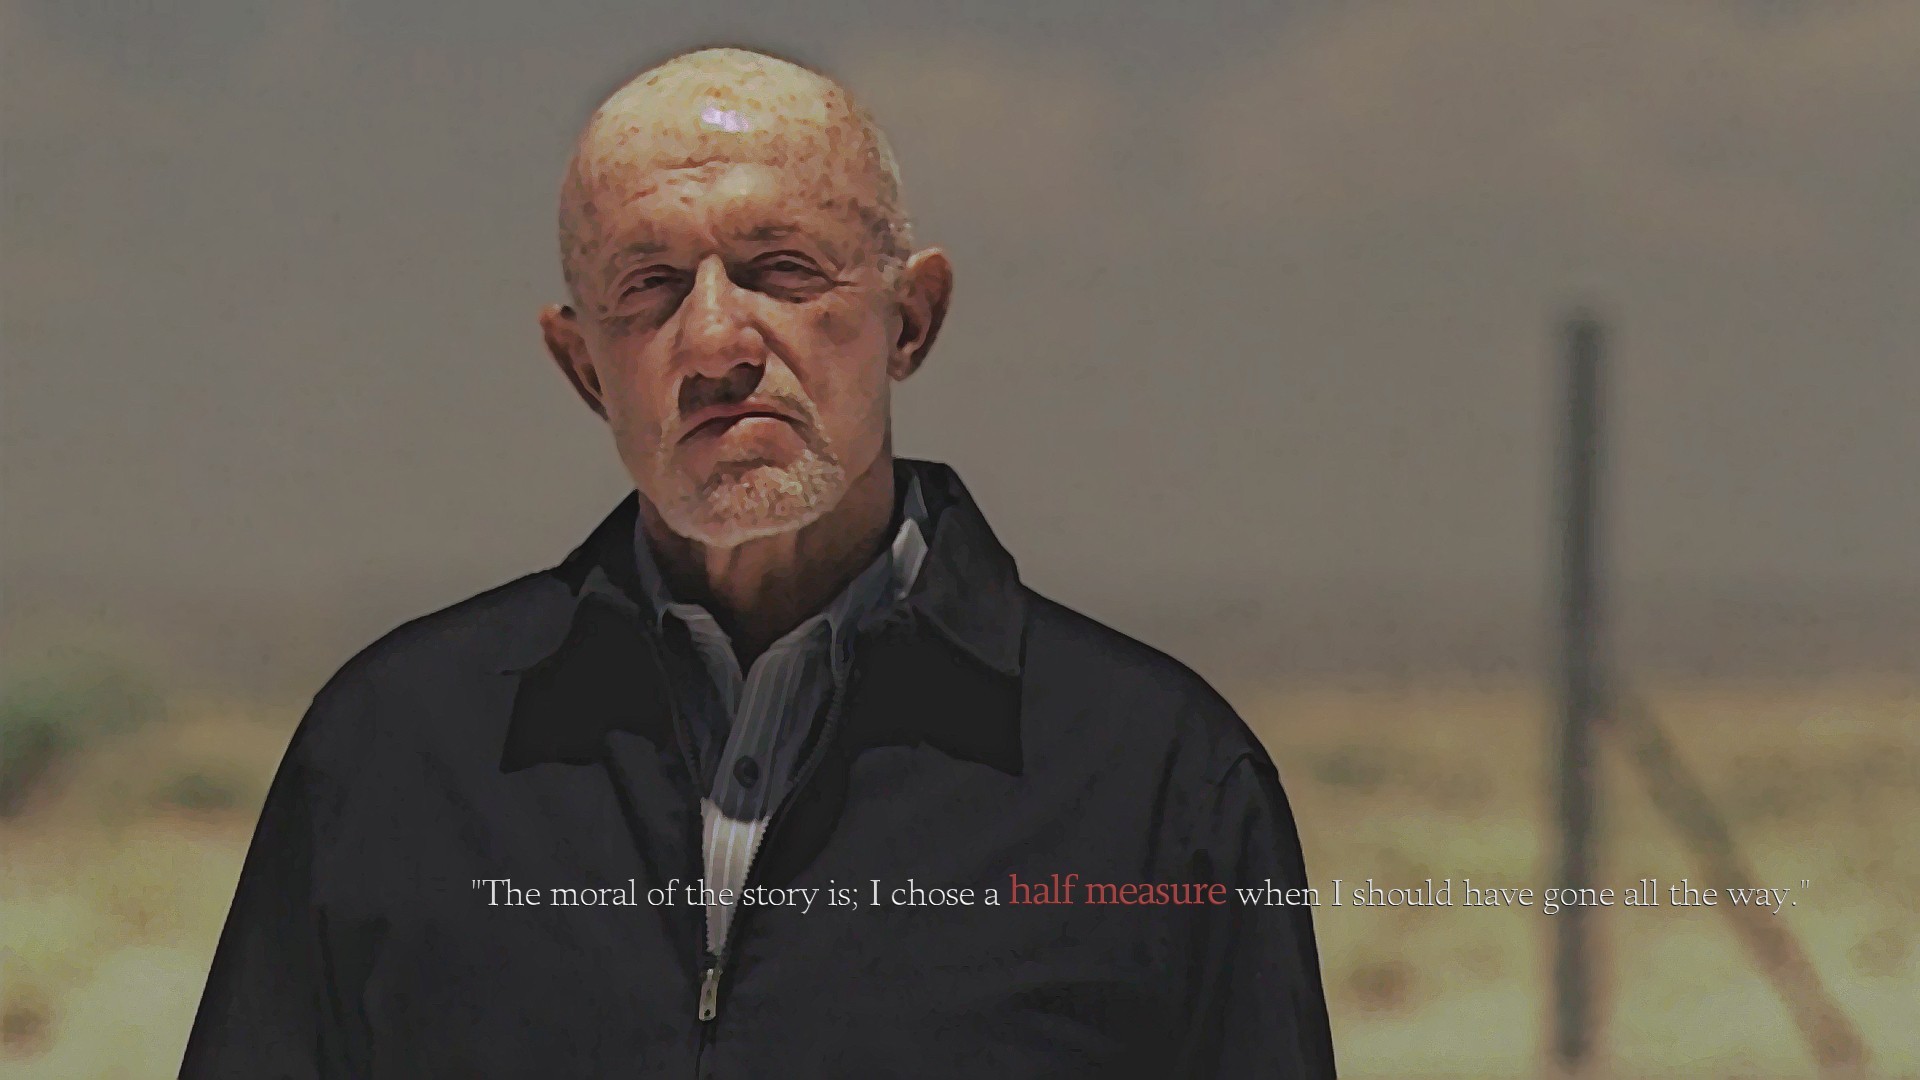 General 1920x1080 Breaking Bad Mike Ehrmantraut quote TV series